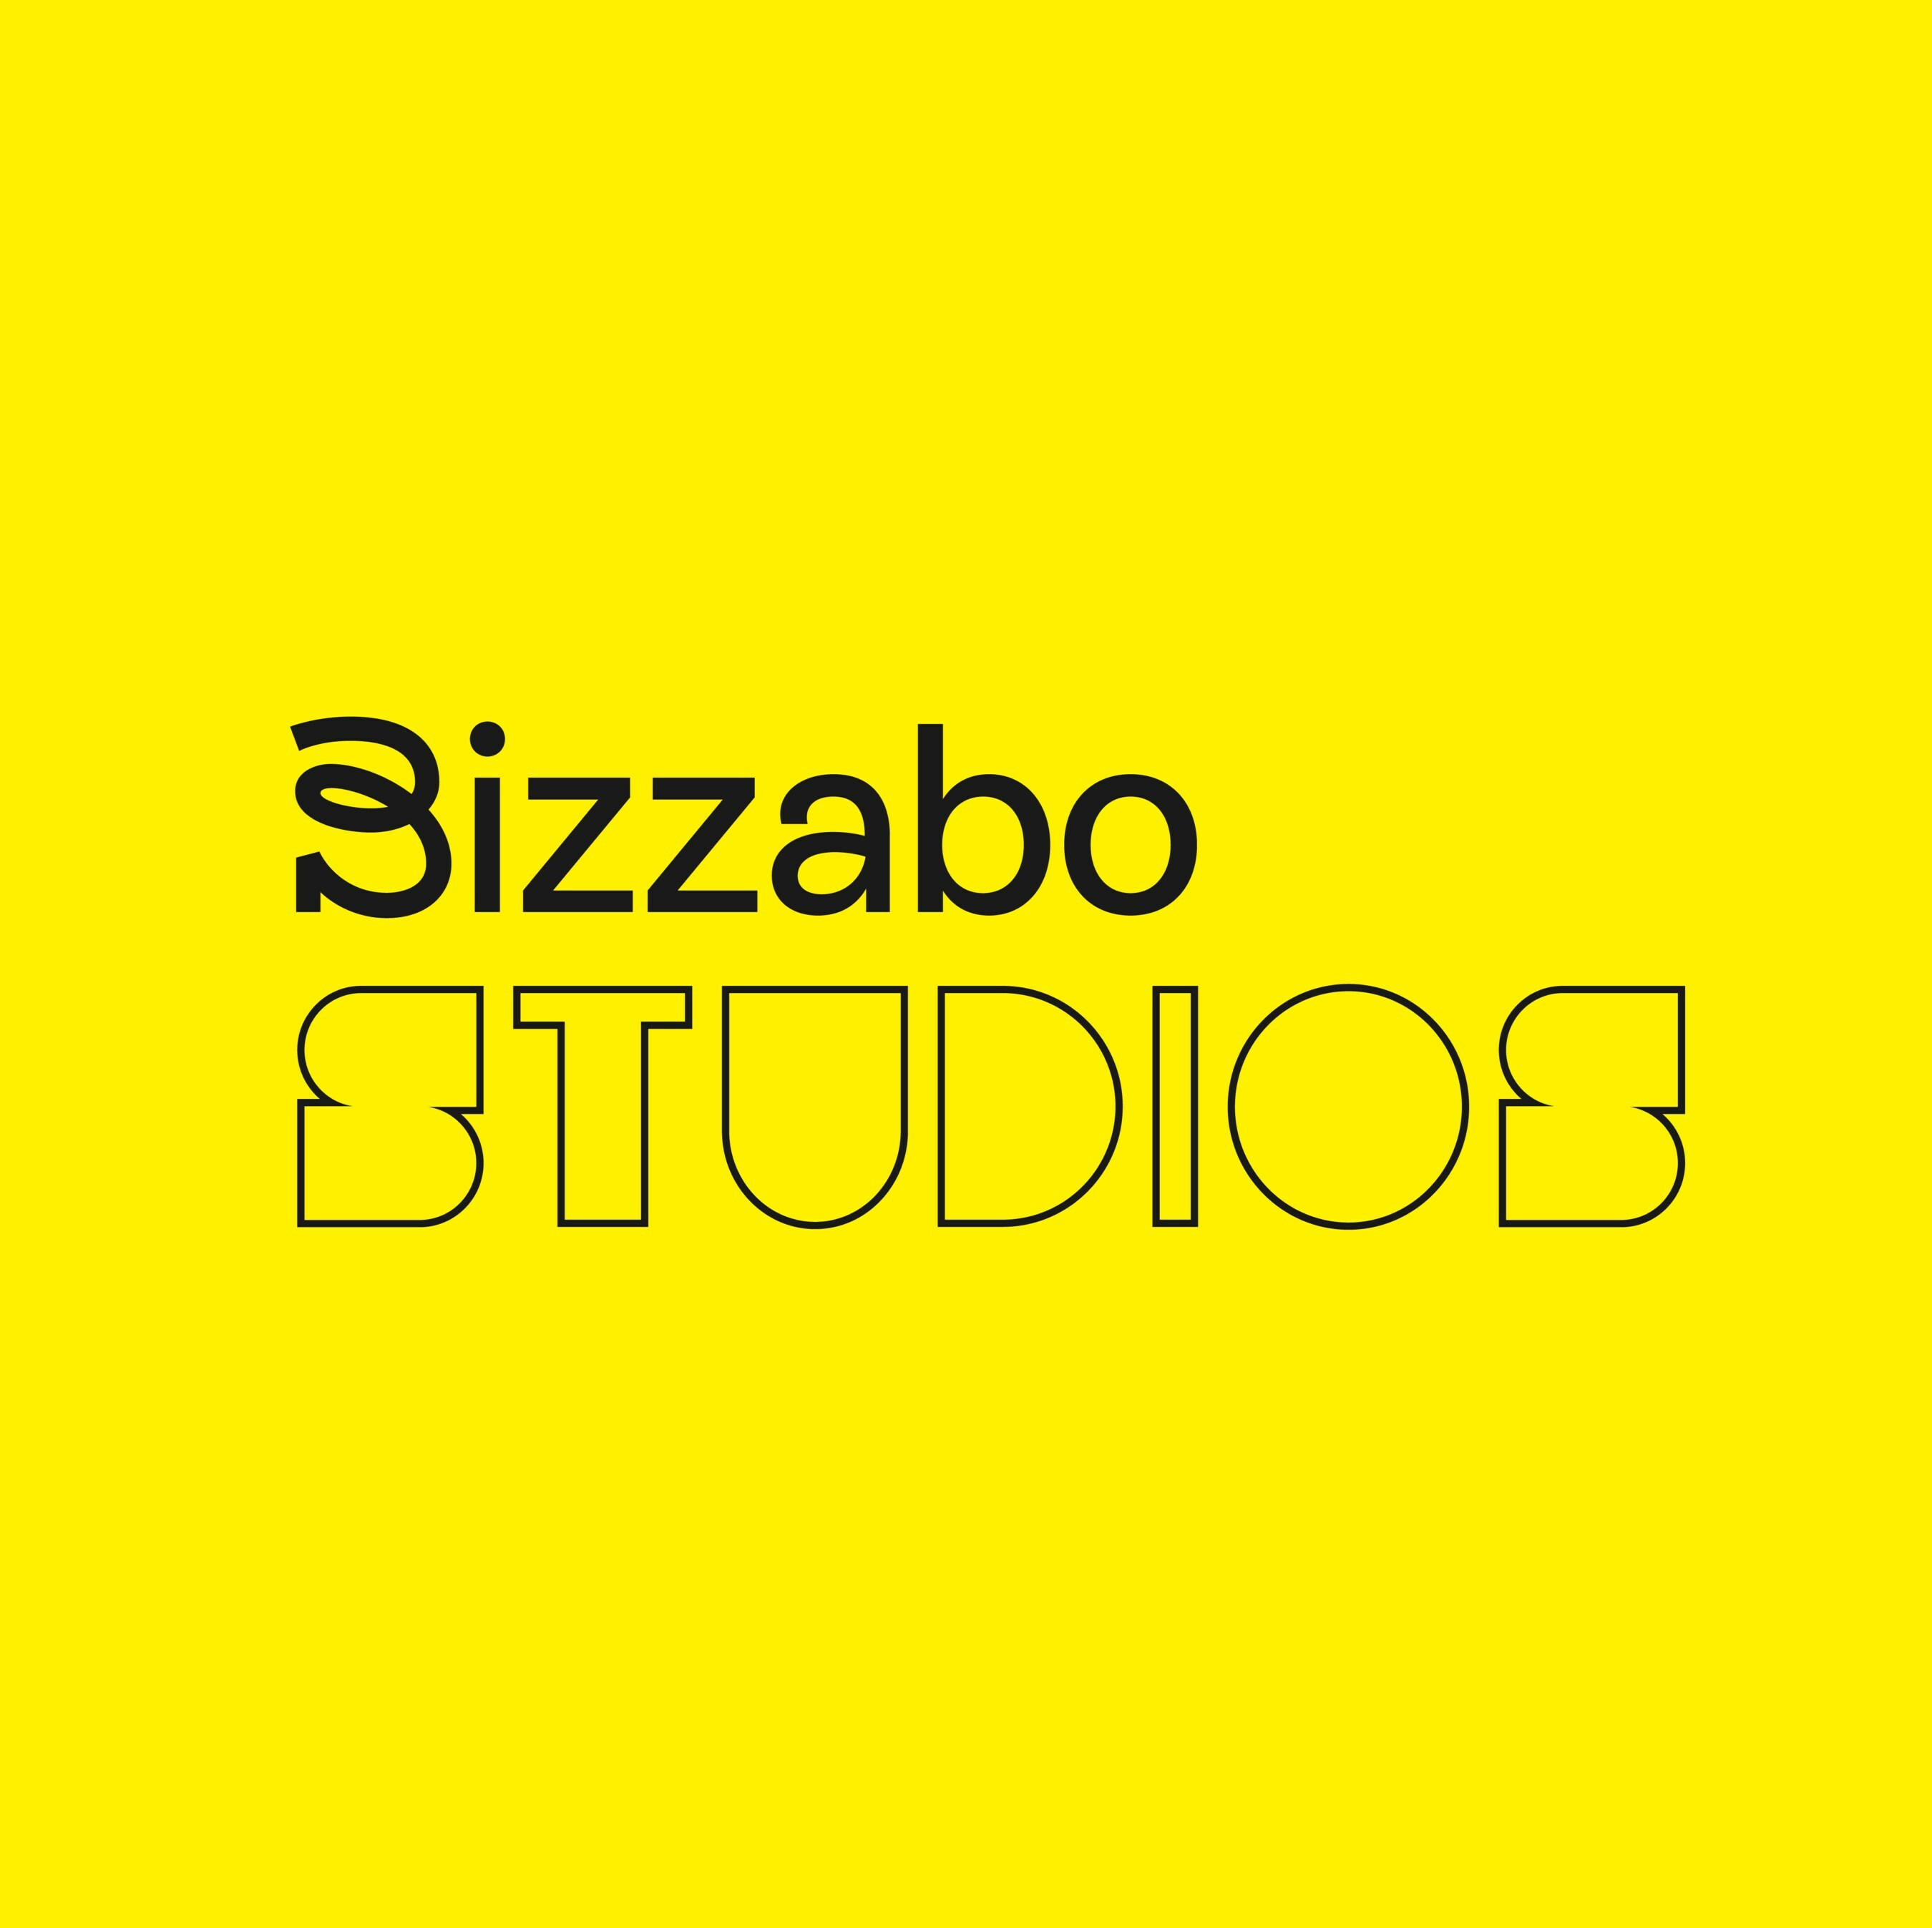 Bizzabo Studios merges award-winning event technology with vast creative and operational expertise to deliver a range of event services packages that empower organizations to deliver an elite event experience – every single time.